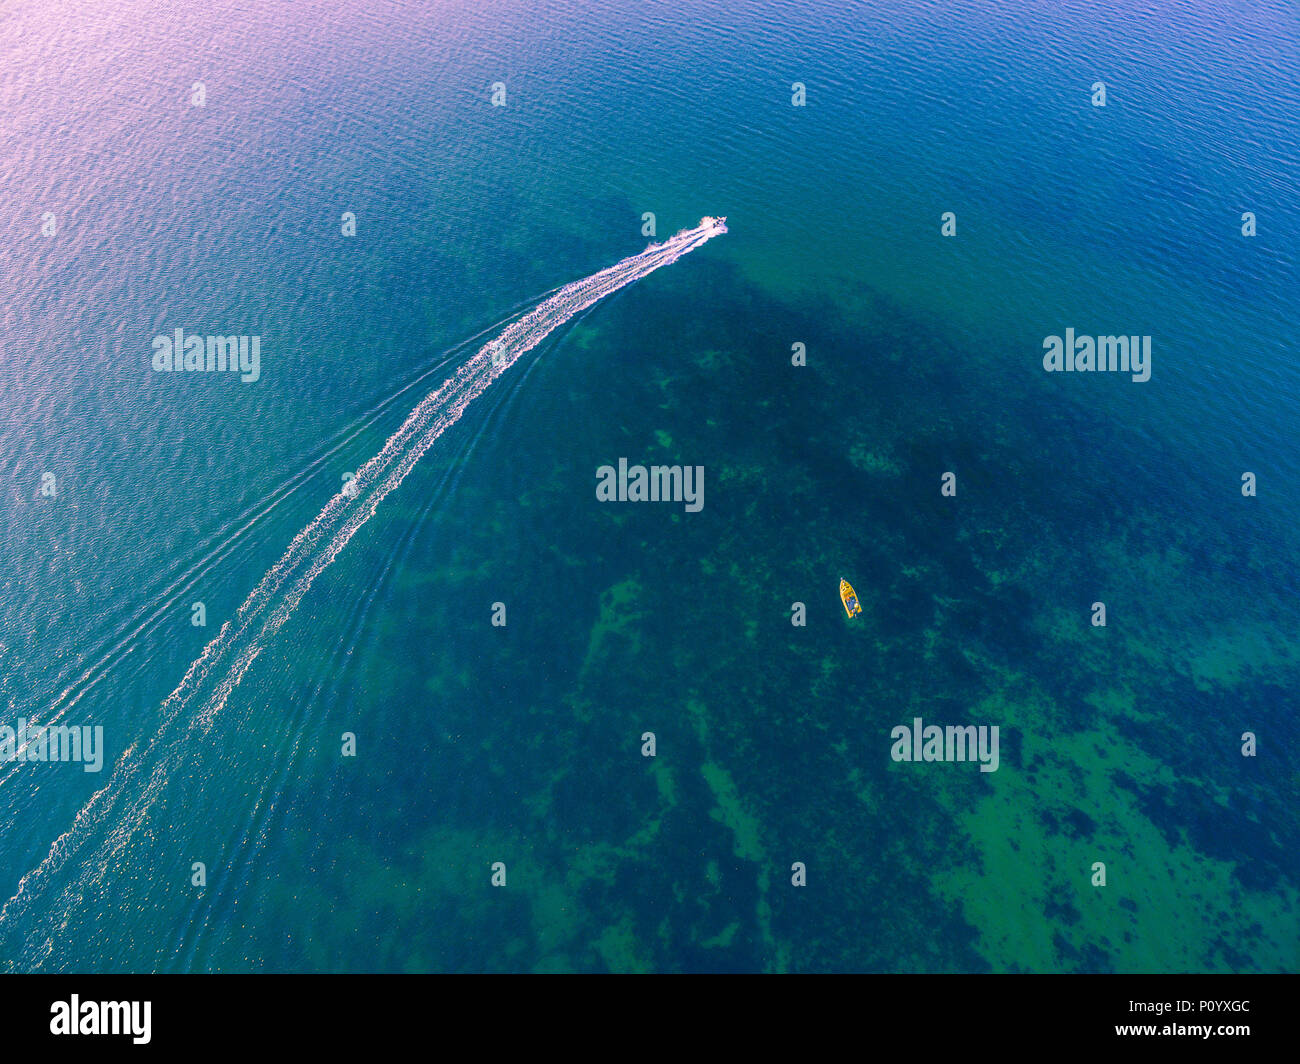 Aerial view of small sailing fishing boat leaving white water trail on shallow ocean water Stock Photo